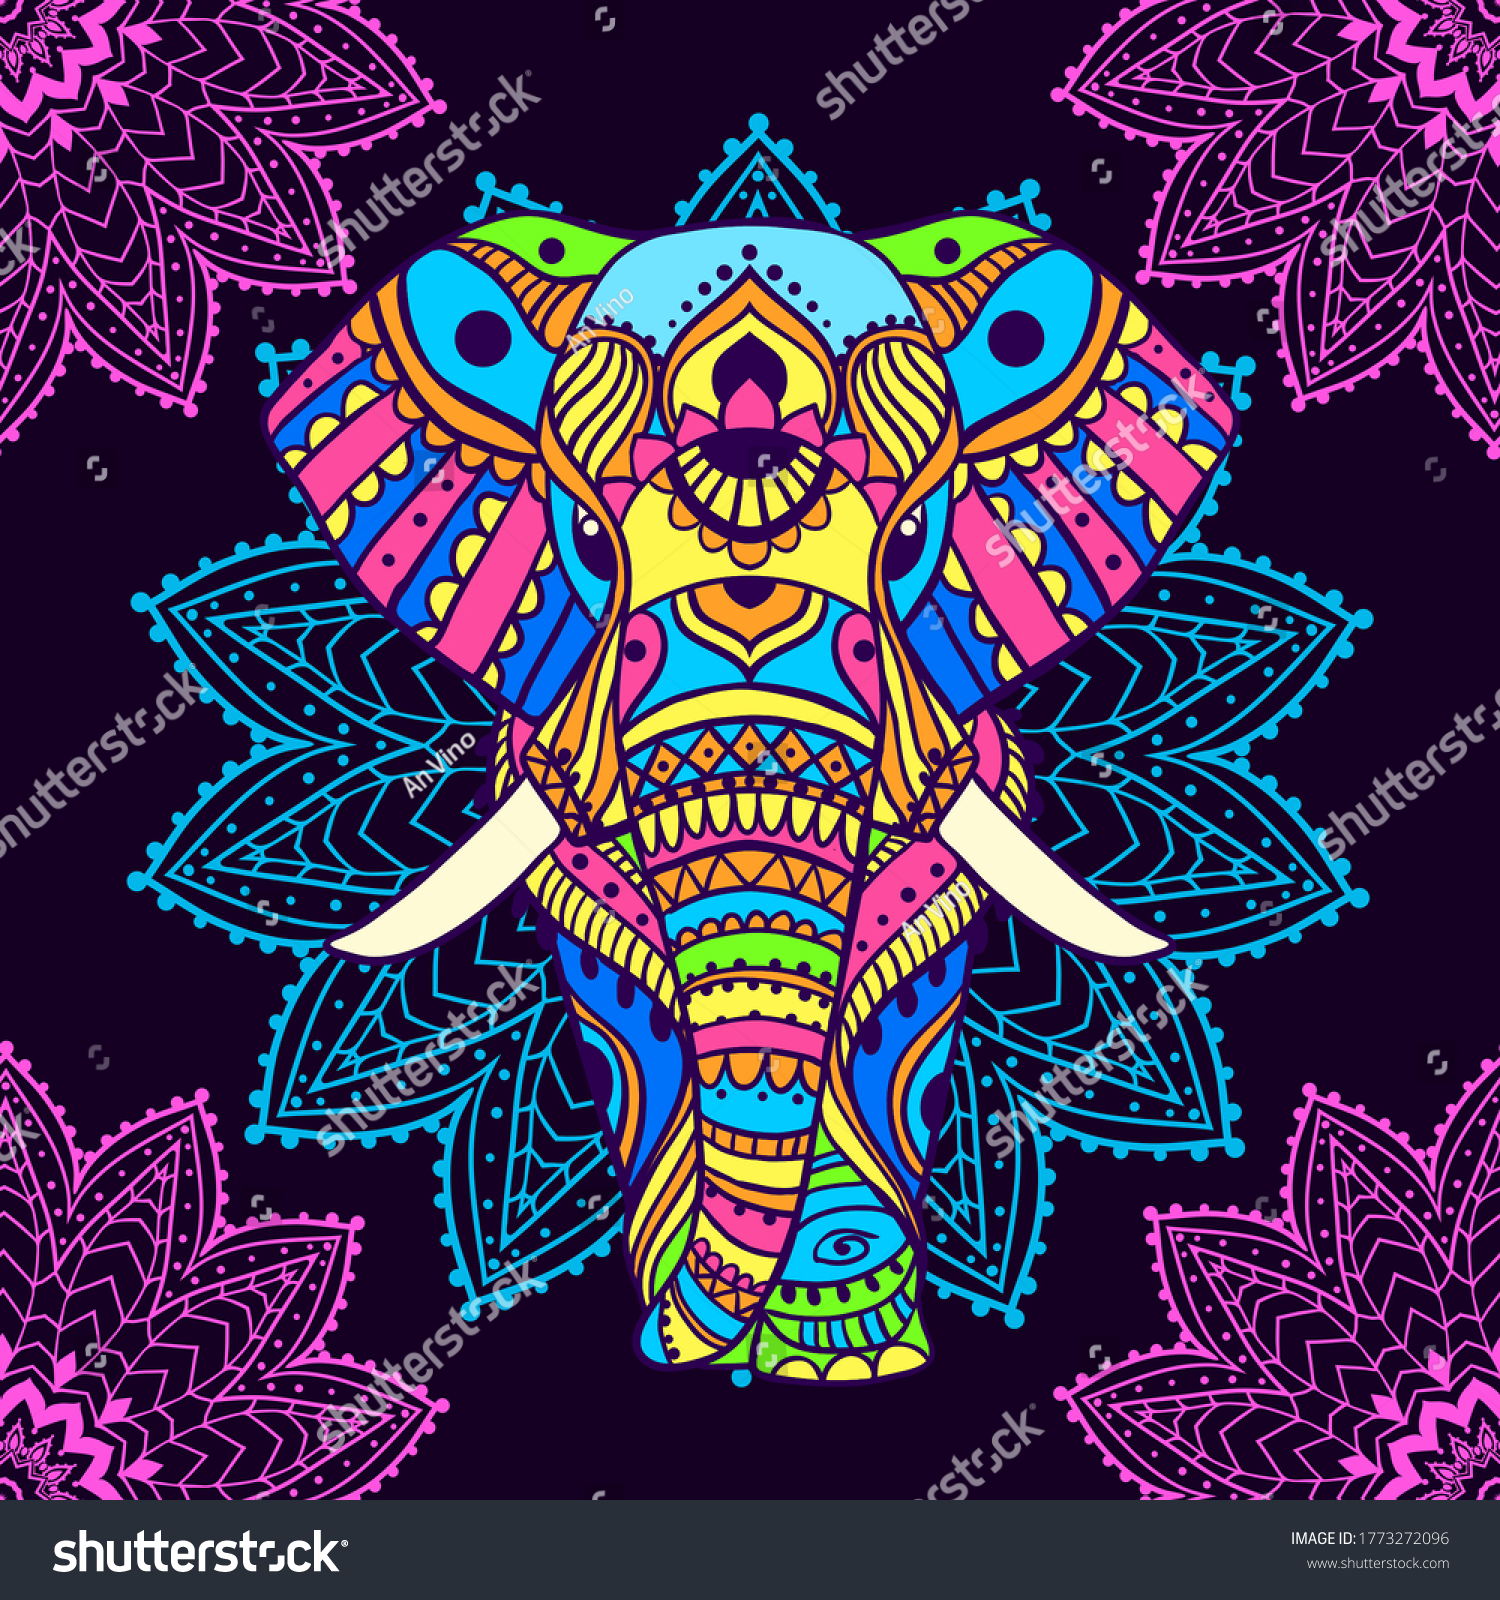 SVG of Boho elephant pattern. Vector illustration. Floral design, hand drawn map with Elephant ornamental.Tribal, India, hippie, Bohemian styles. Psychedelic colors svg